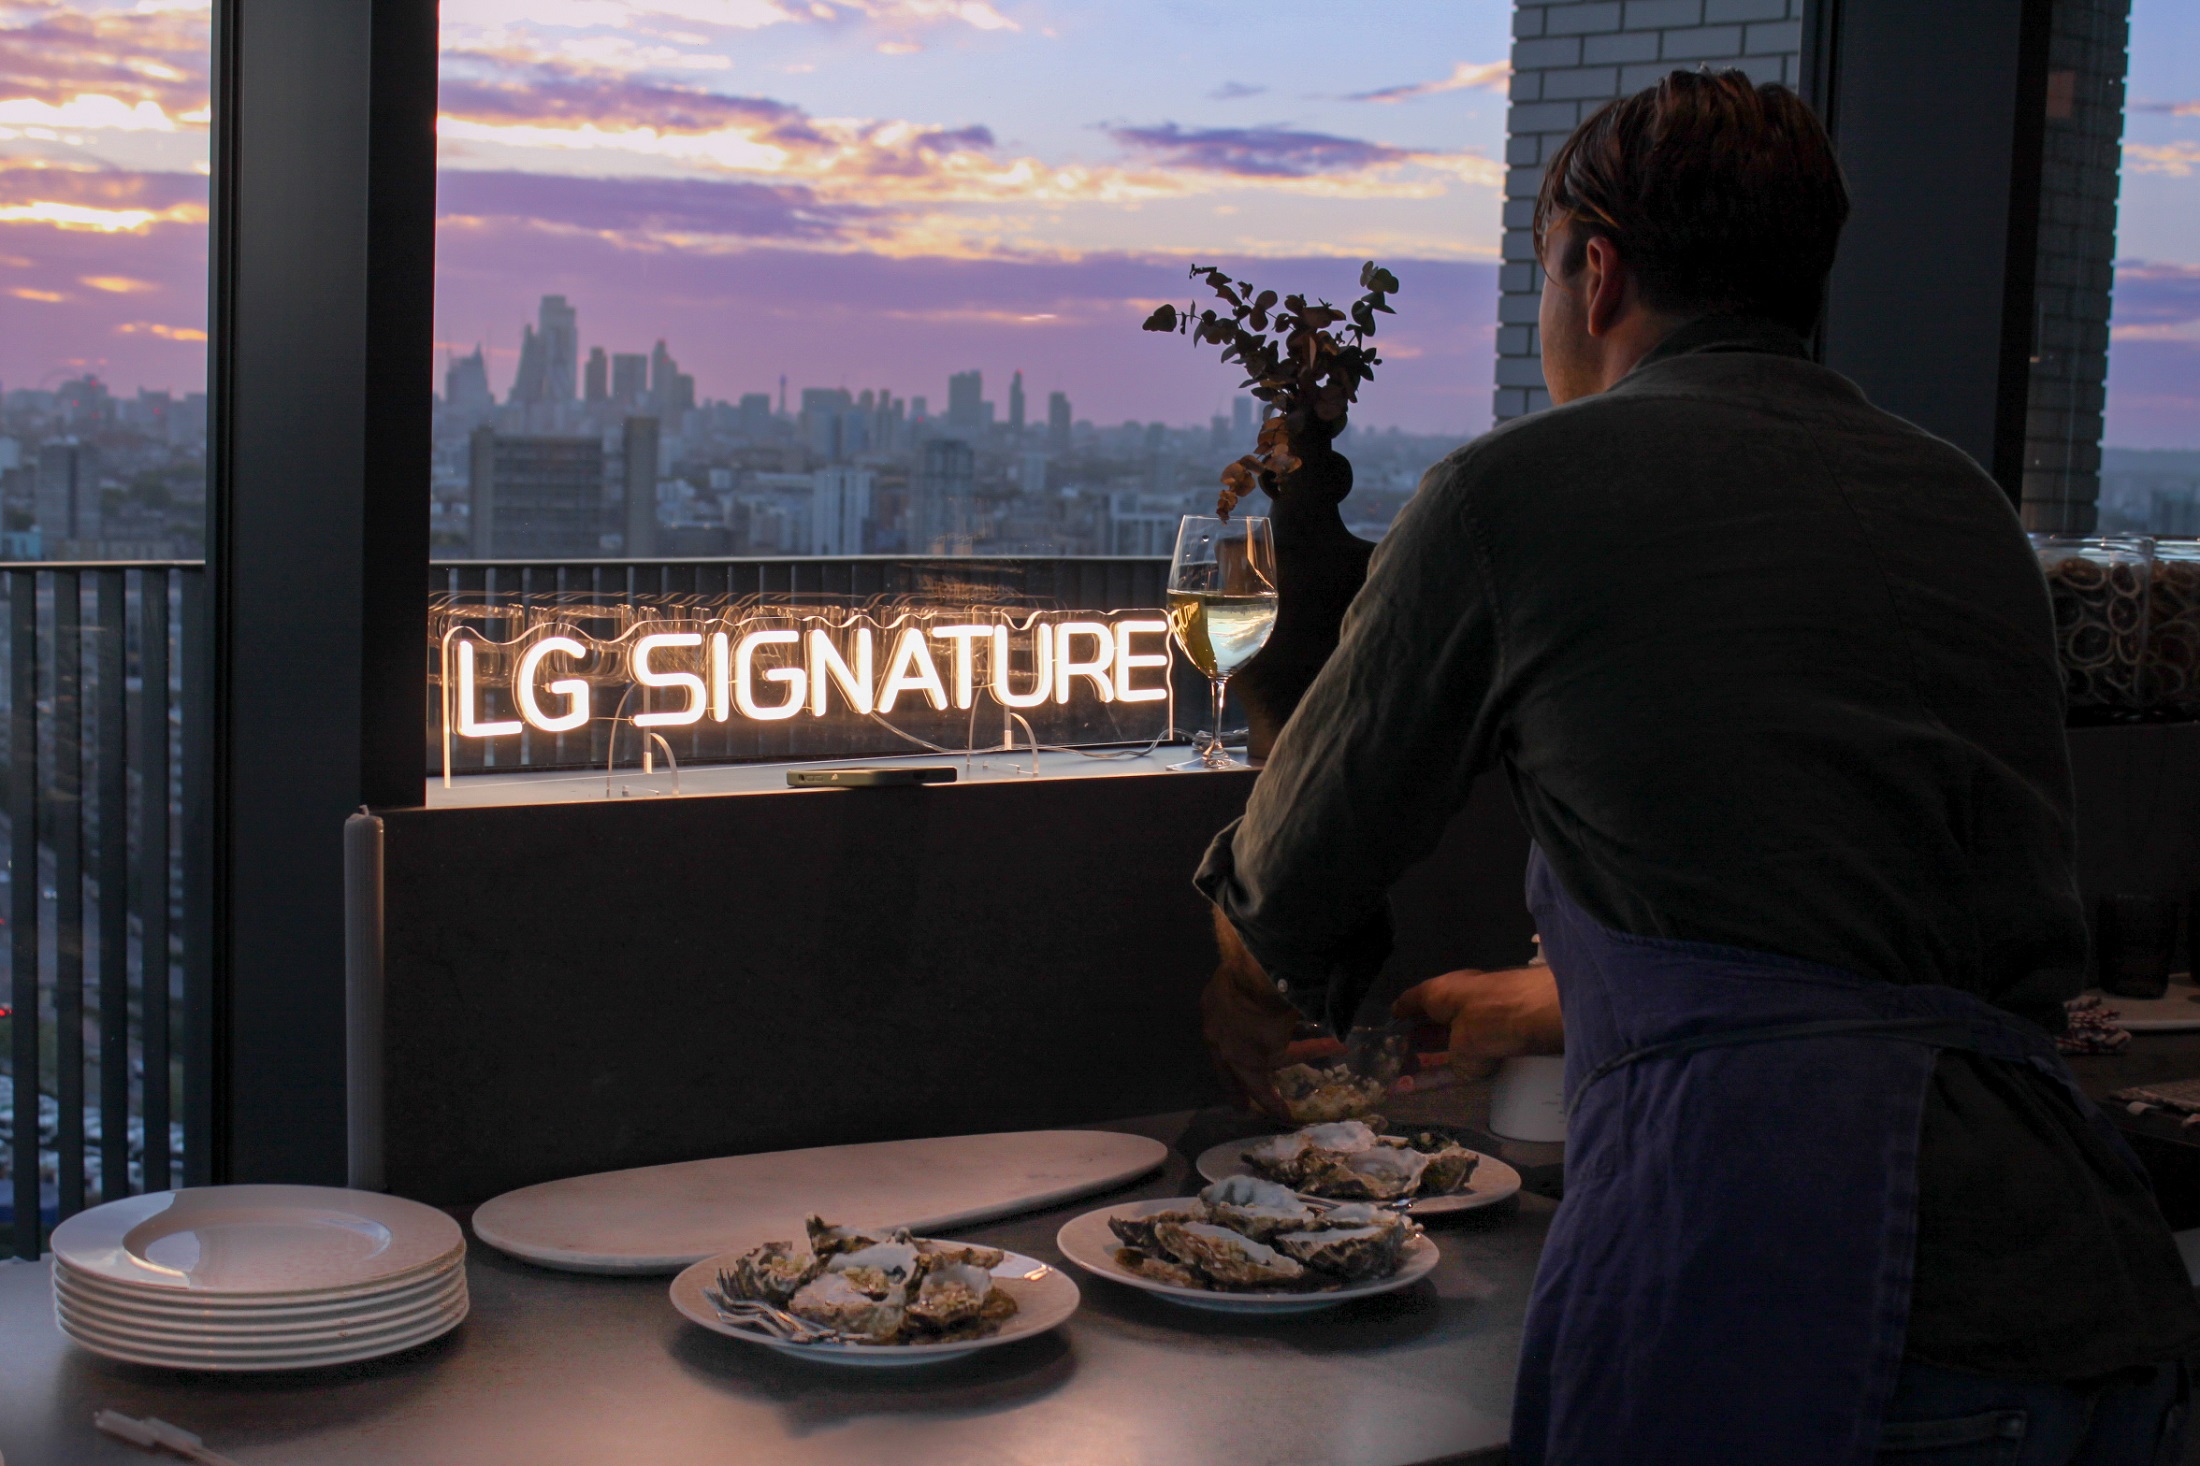 A chef preparing food as he looks out on to the London skyline and “LG SIGNATURE” neon sign